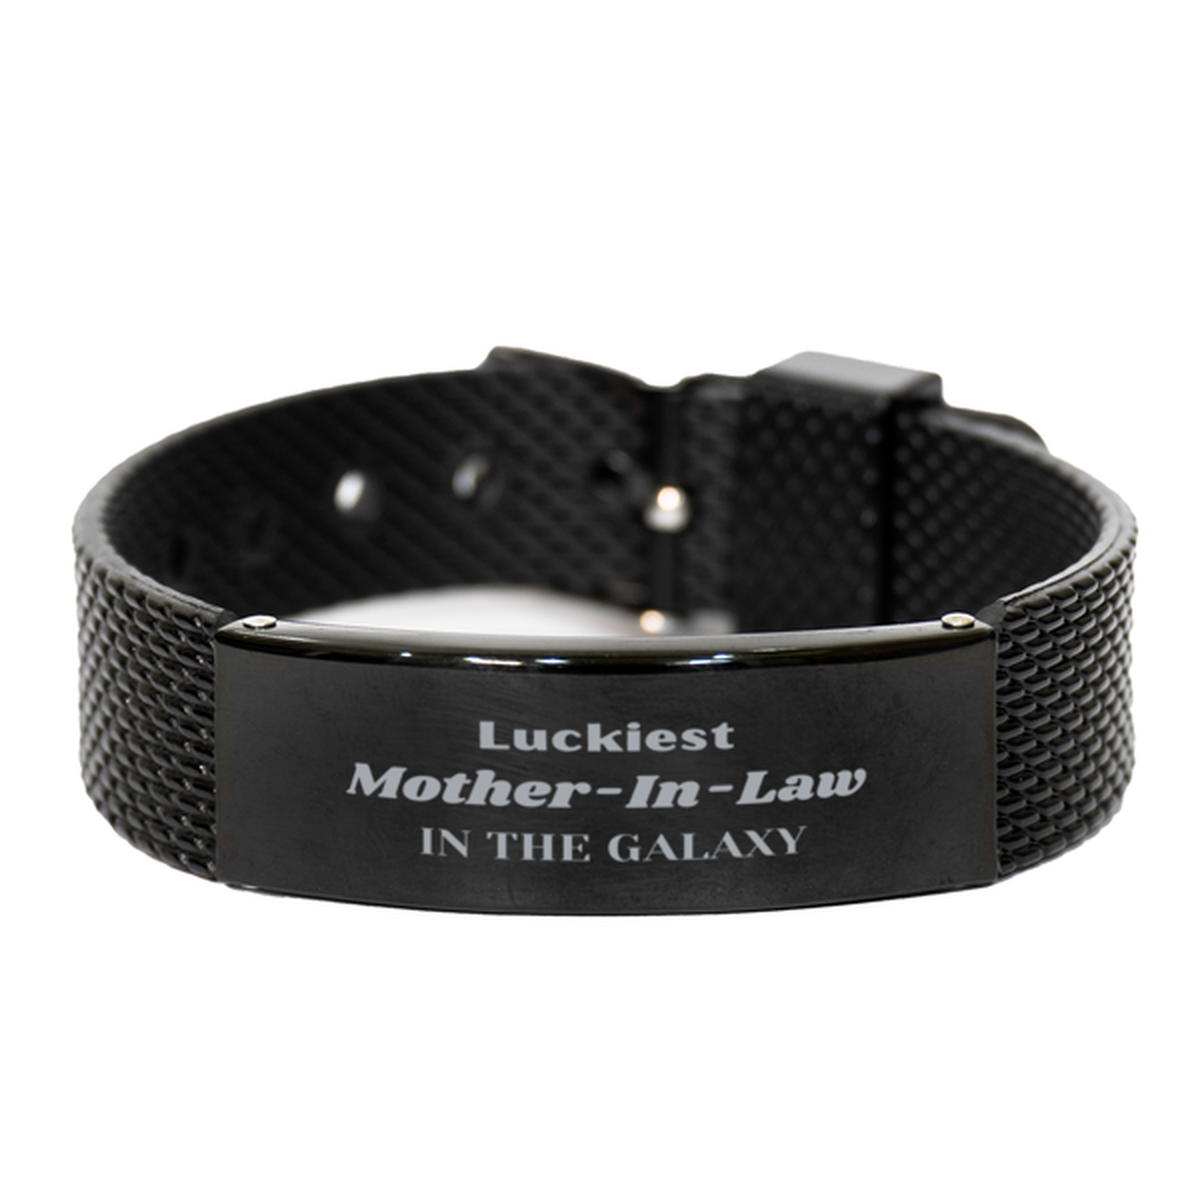 Luckiest Mother-In-Law in the Galaxy, To My Mother-In-Law Engraved Gifts, Christmas Mother-In-Law Black Shark Mesh Bracelet Gifts, X-mas Birthday Unique Gifts For Mother-In-Law Men Women